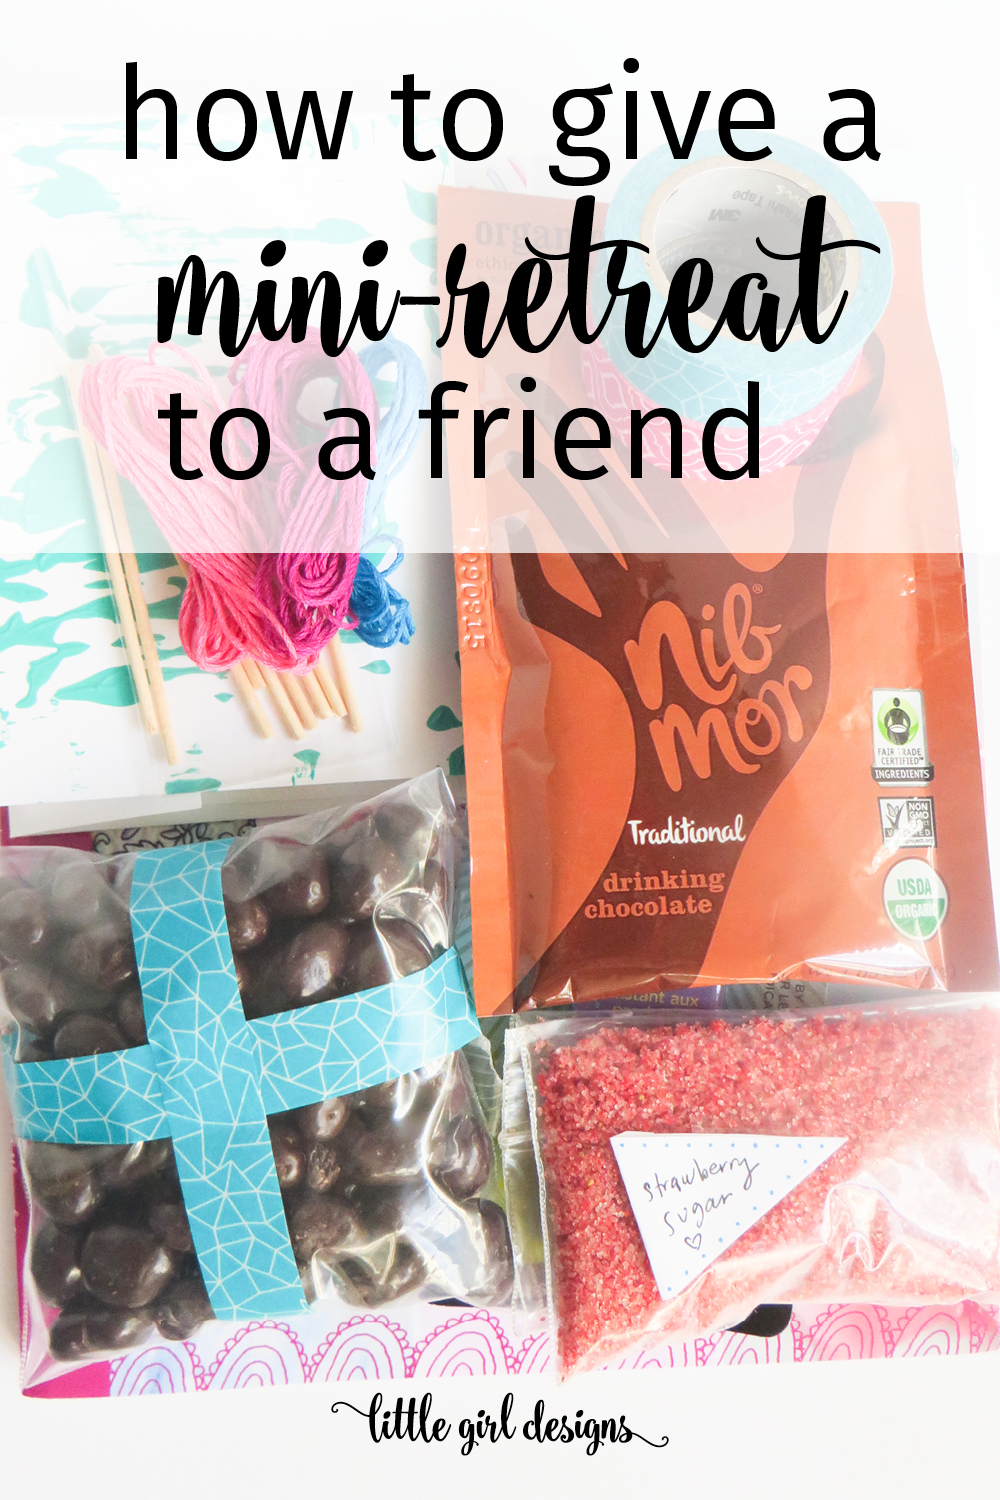 How to Give a Mini-Retreat to a Friend